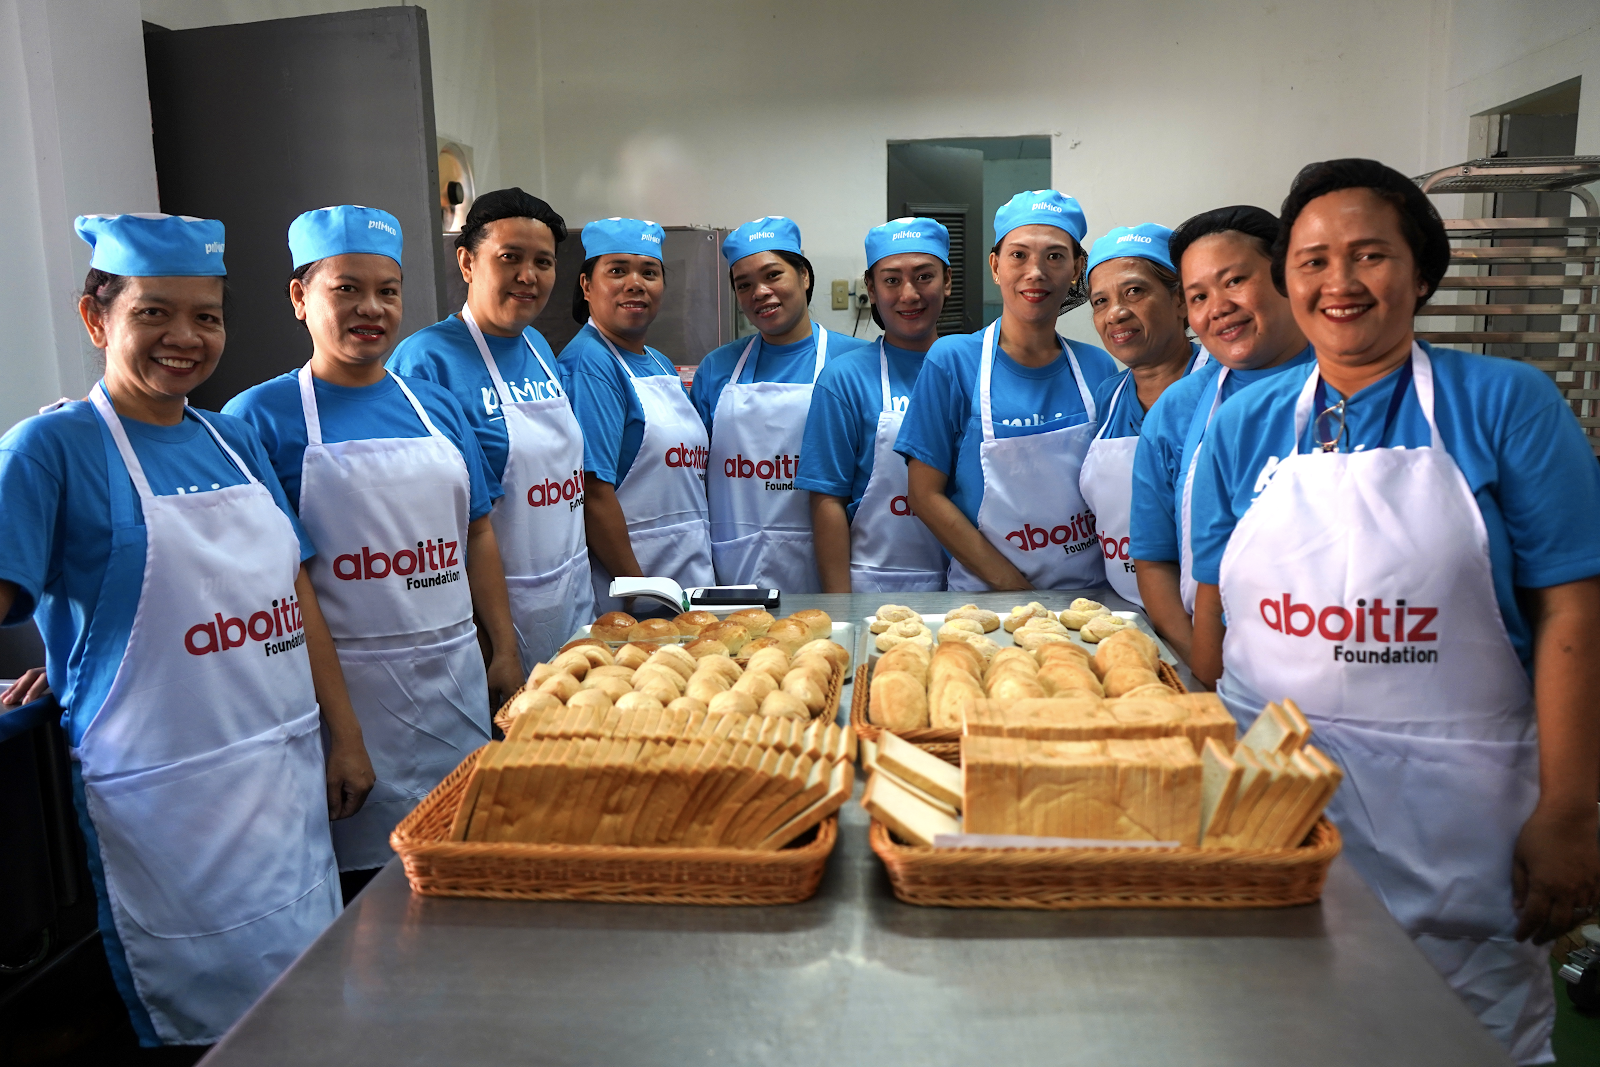 Hot off the oven: Bakery sells ‘Pan Digong’ made by PSG spouses